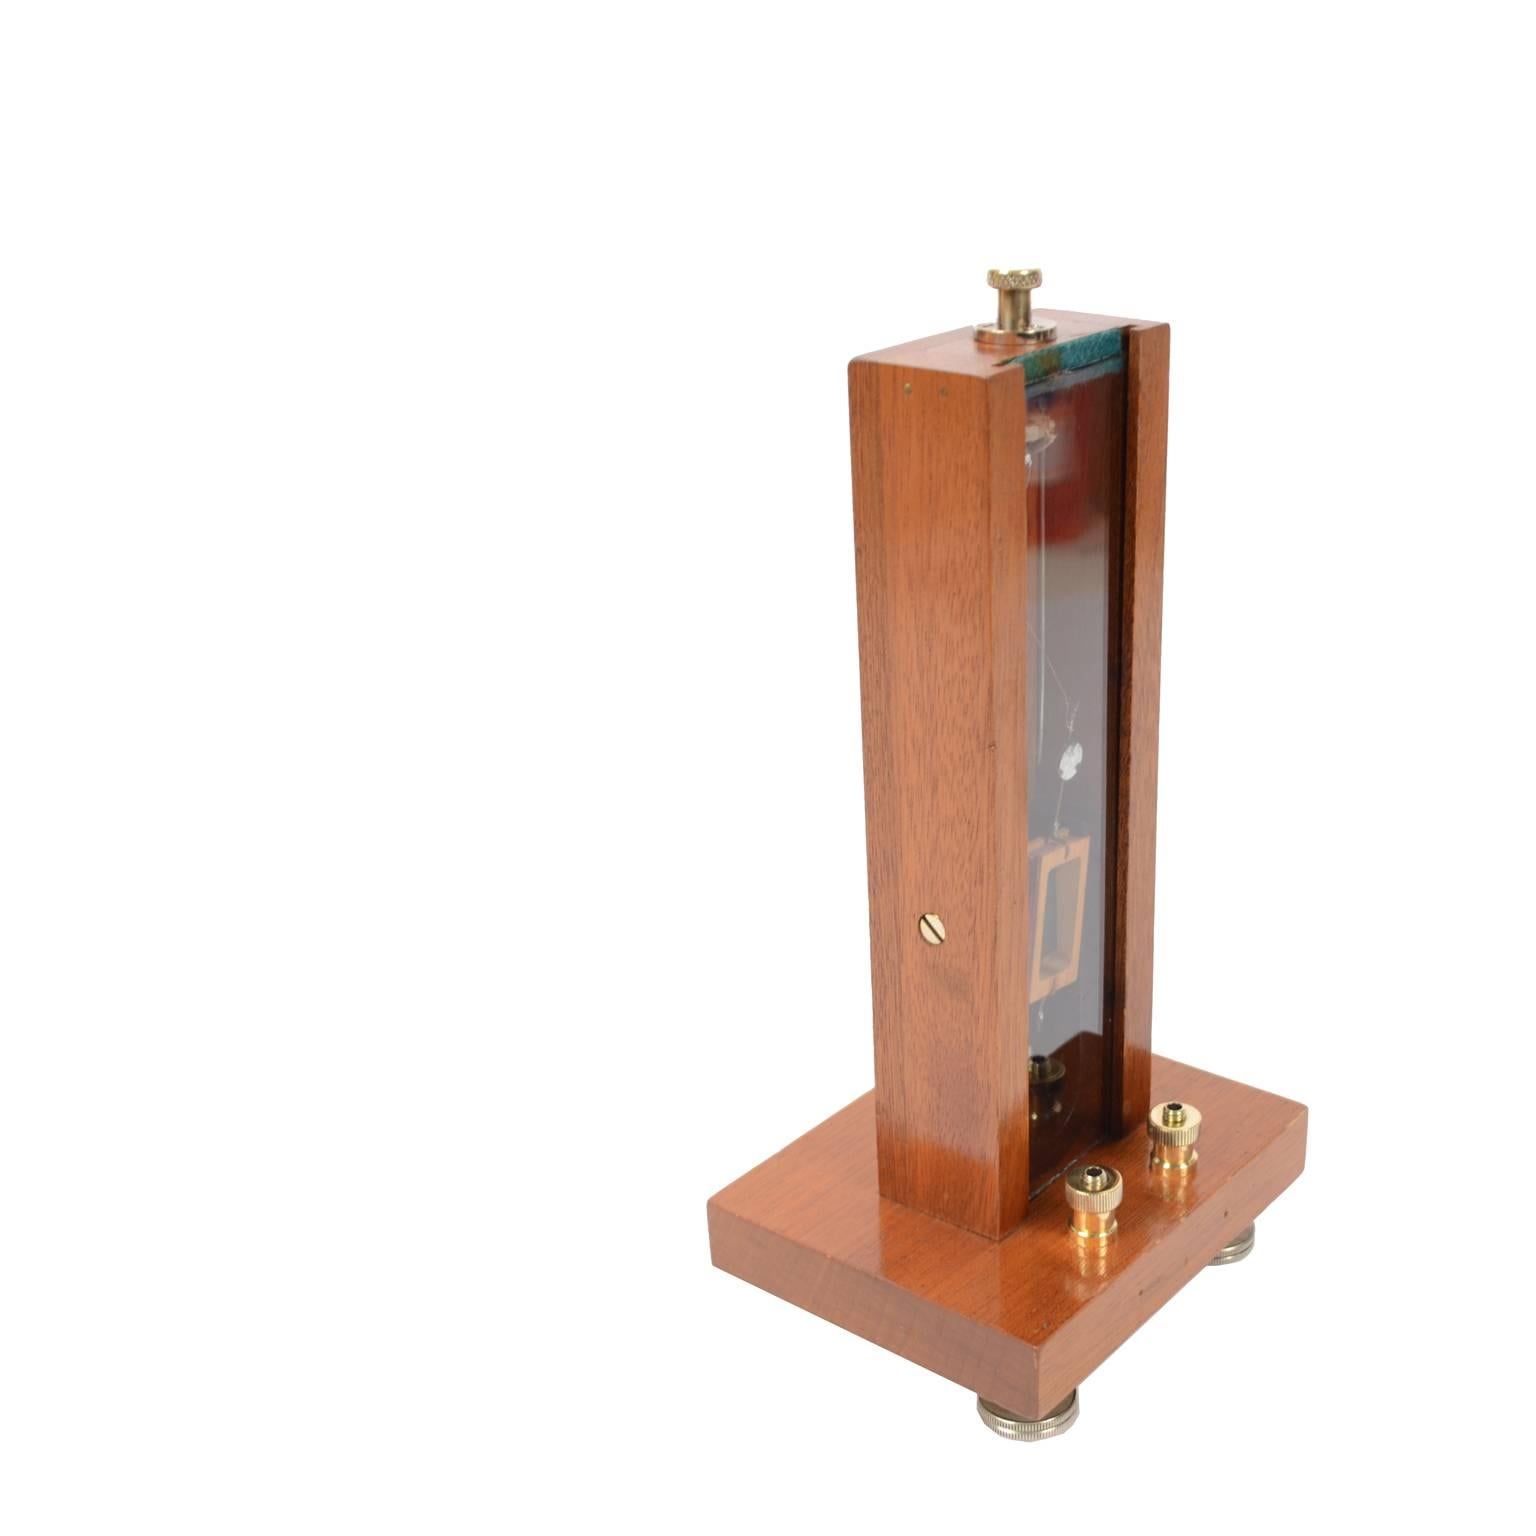 Vertical mirror galvanometer made in 1850 circa, oak and glass, three adjustable screws at the base. Tool constituted by a magnet bar movable inside a coil and connected to a needle. In the absence of current the needle is positioned vertically